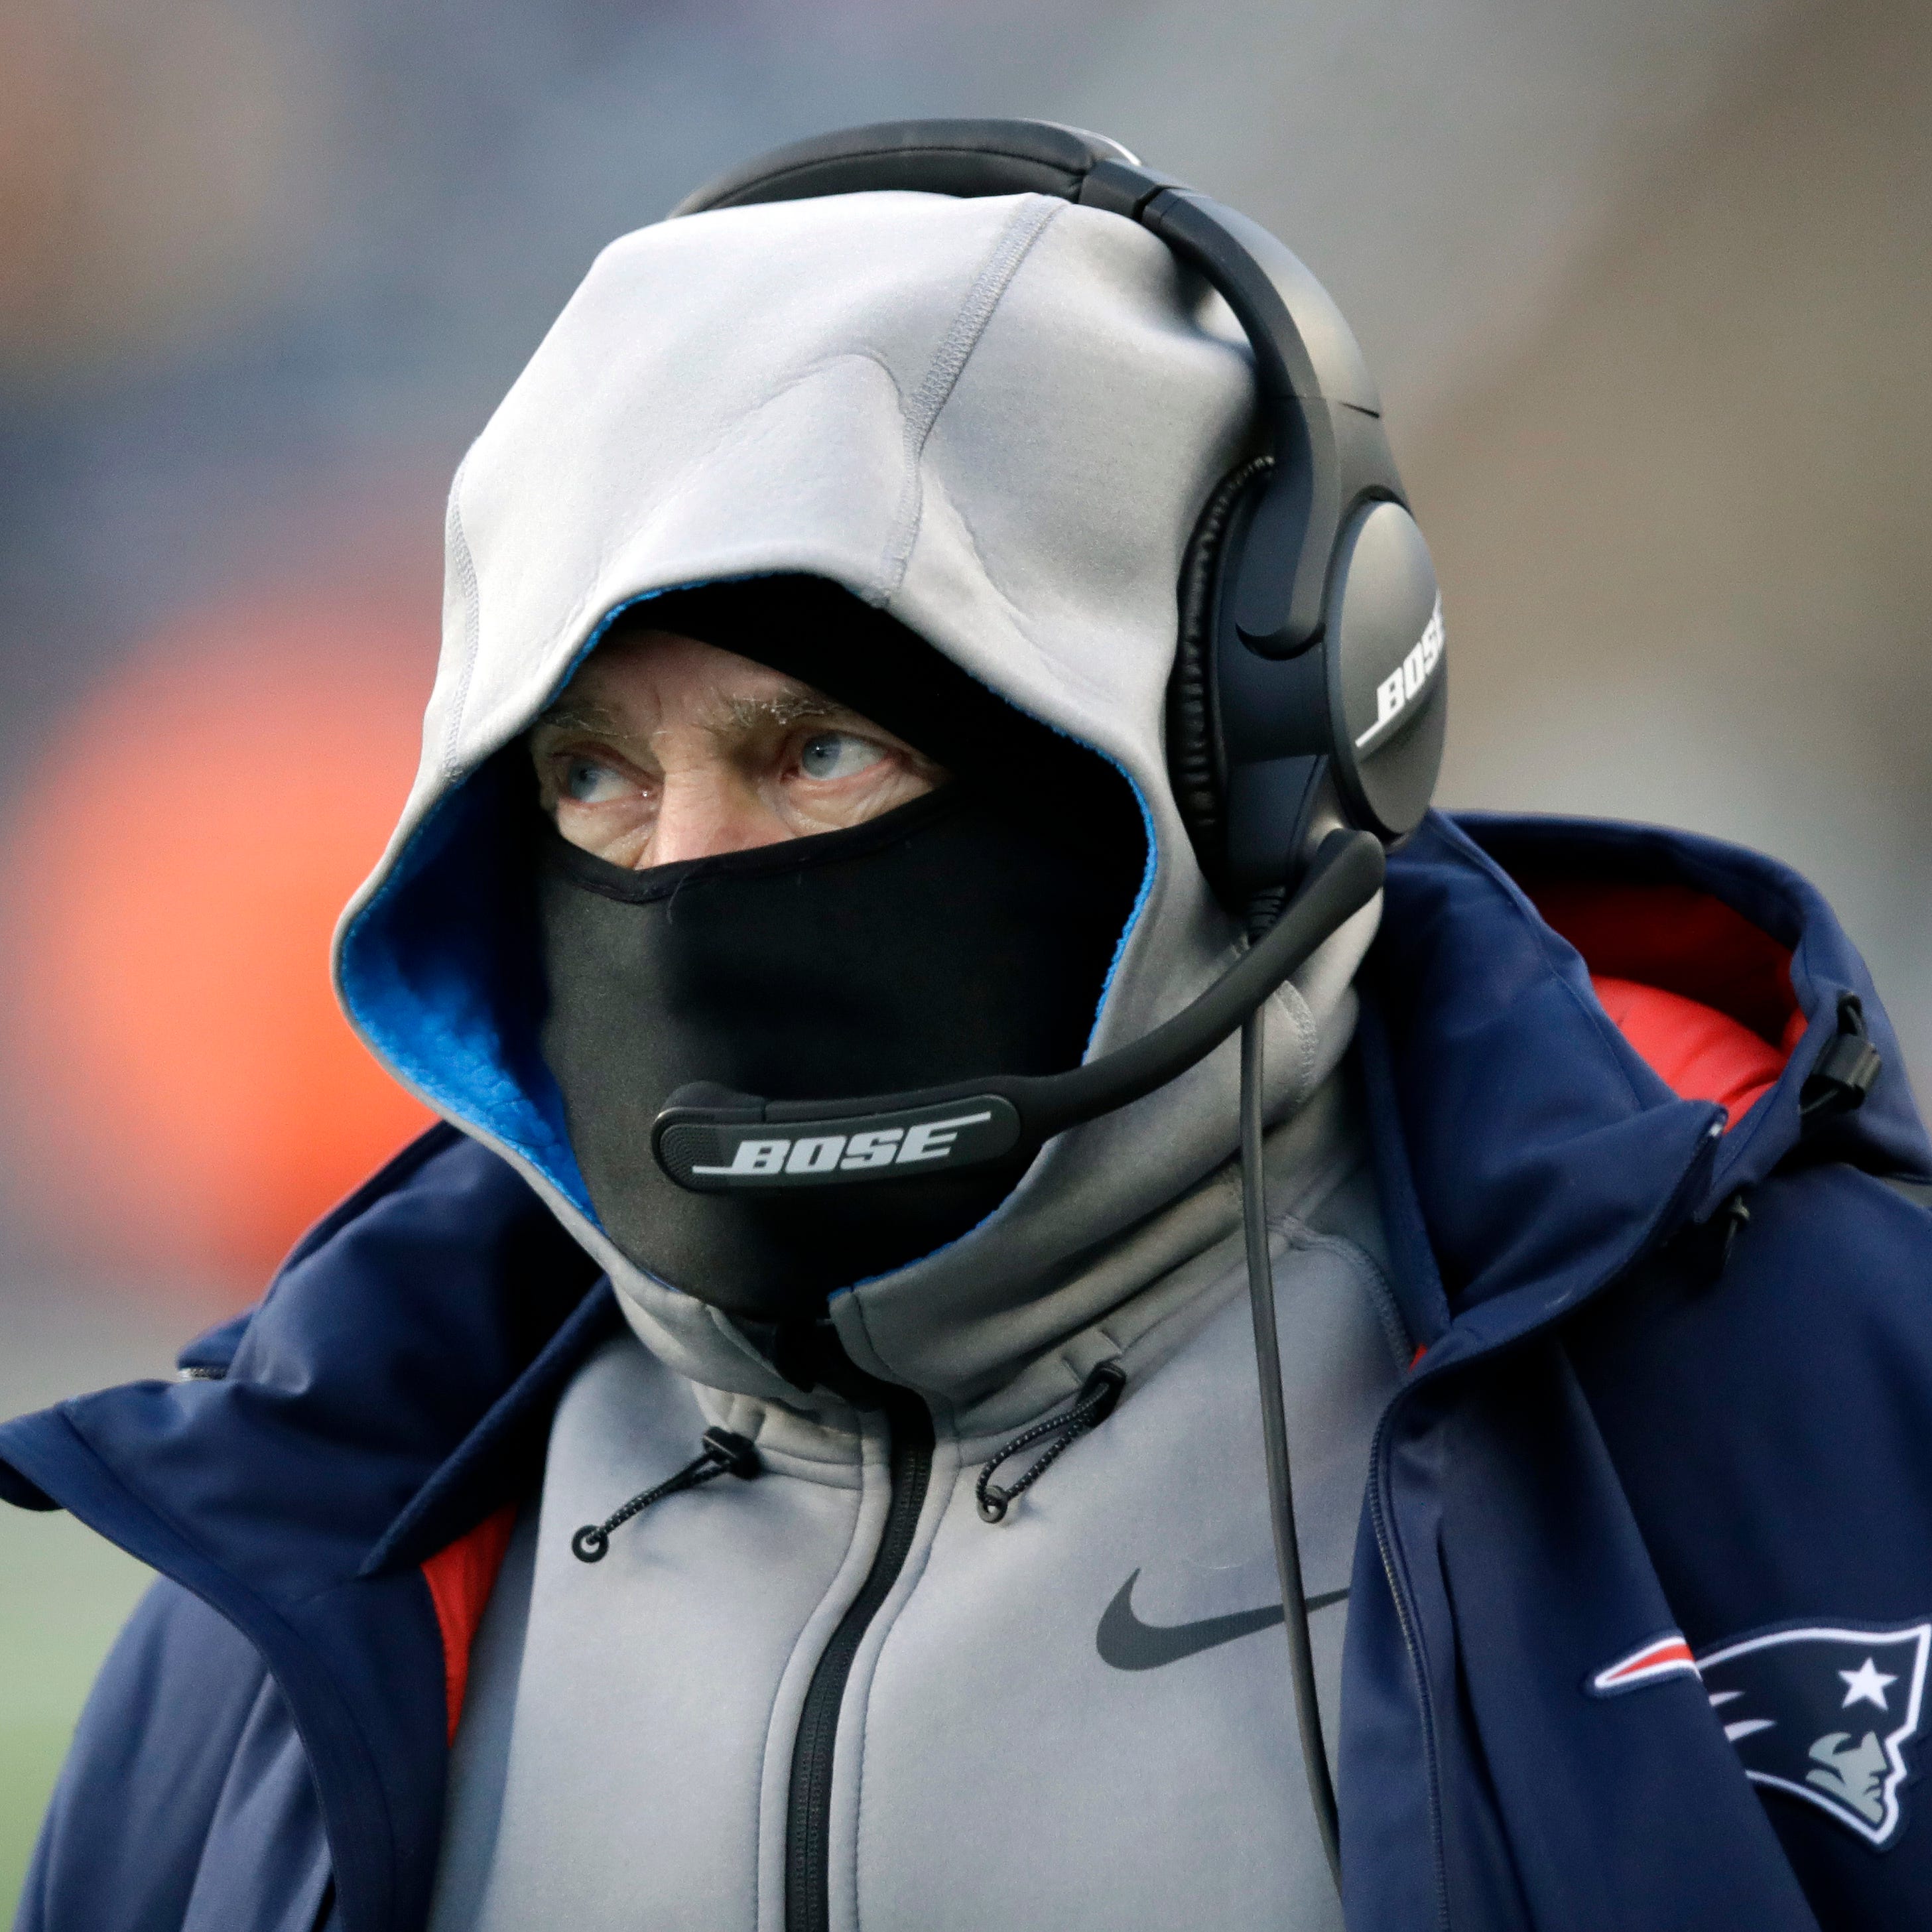 New England Patriots head coach Bill Belichick may be bundling up like this when his team hosts the Cincinnati Bengals on Sunday